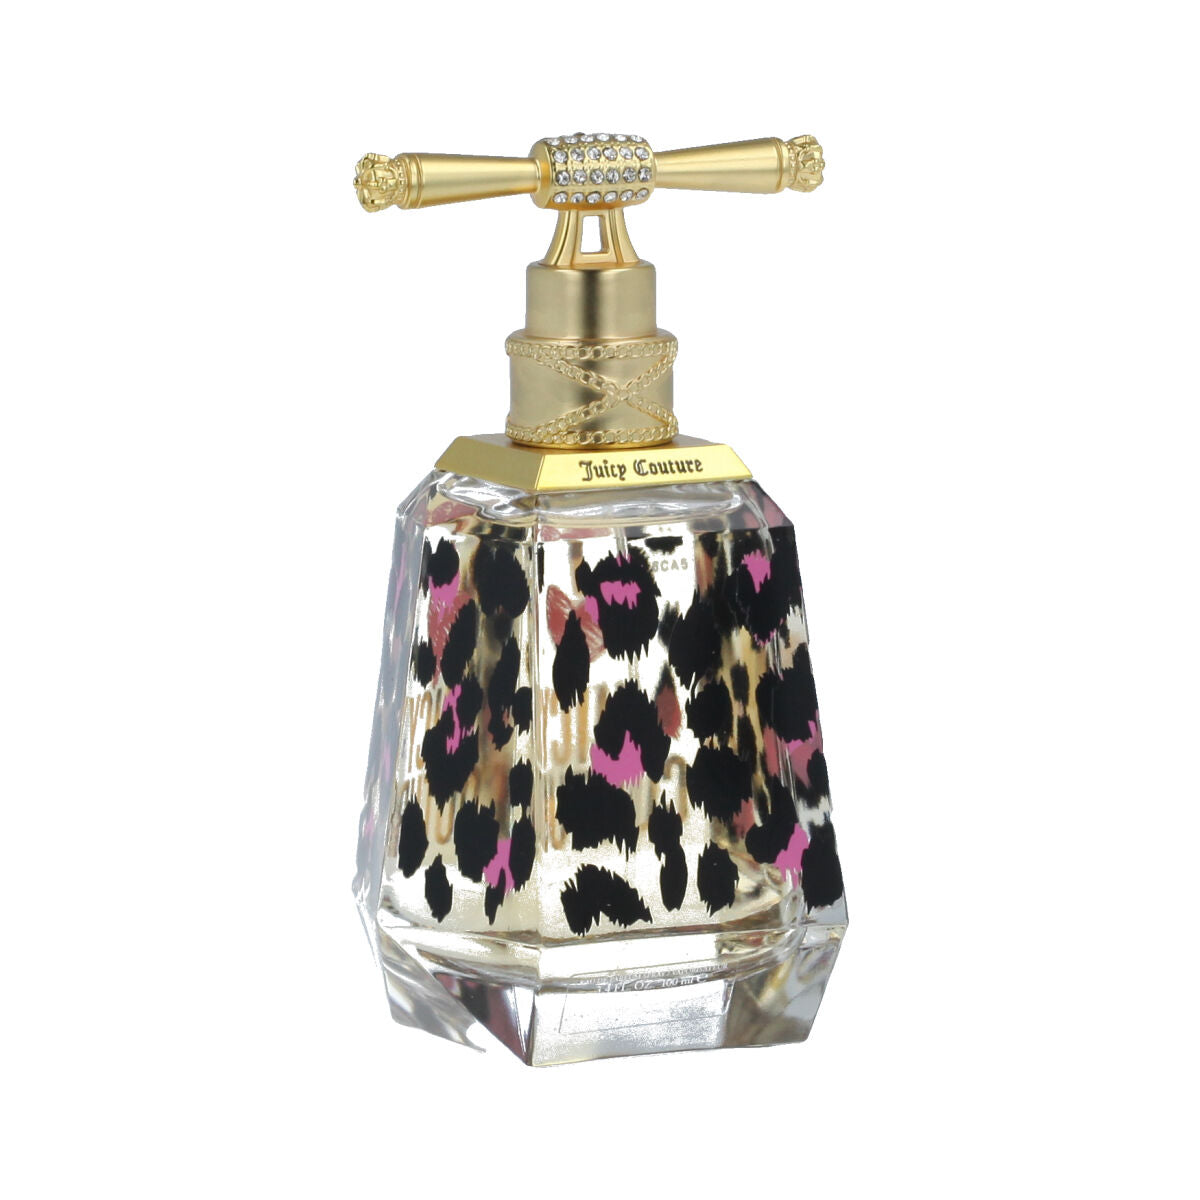 Damesparfum Juicy Couture EDP I Love Juicy Couture 100 ml